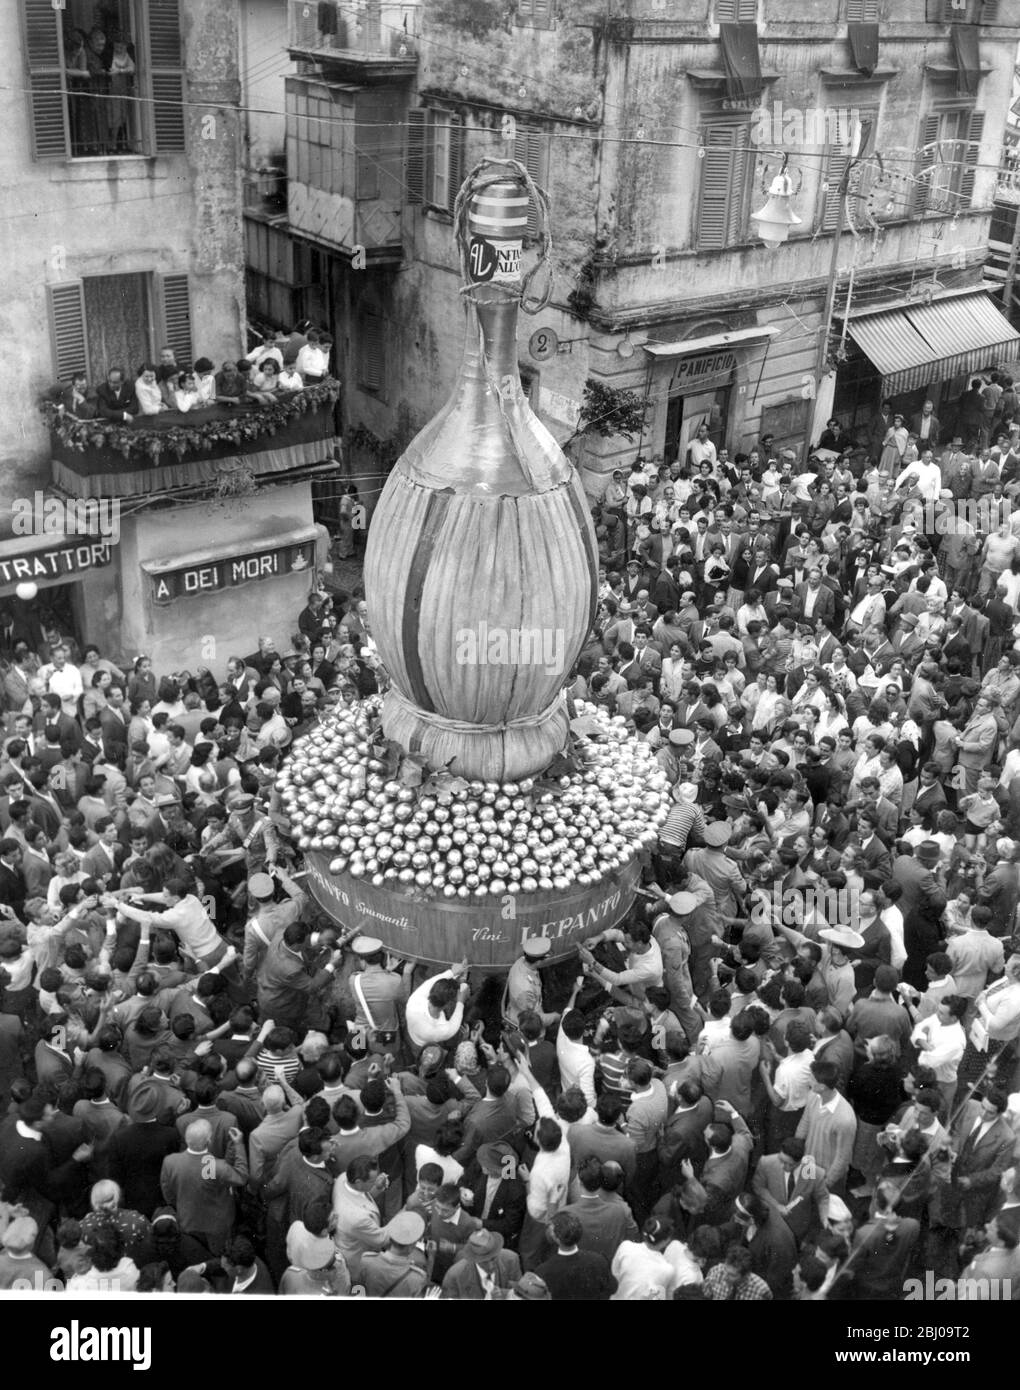 Marino , Italy . - Towns yearly wine festival celebrated on the first sunday of October . - Huge flask placed on the water fountain in the centre of square and wine is distributed free to the gathered crowd . - October 1958 - - Stock Photo